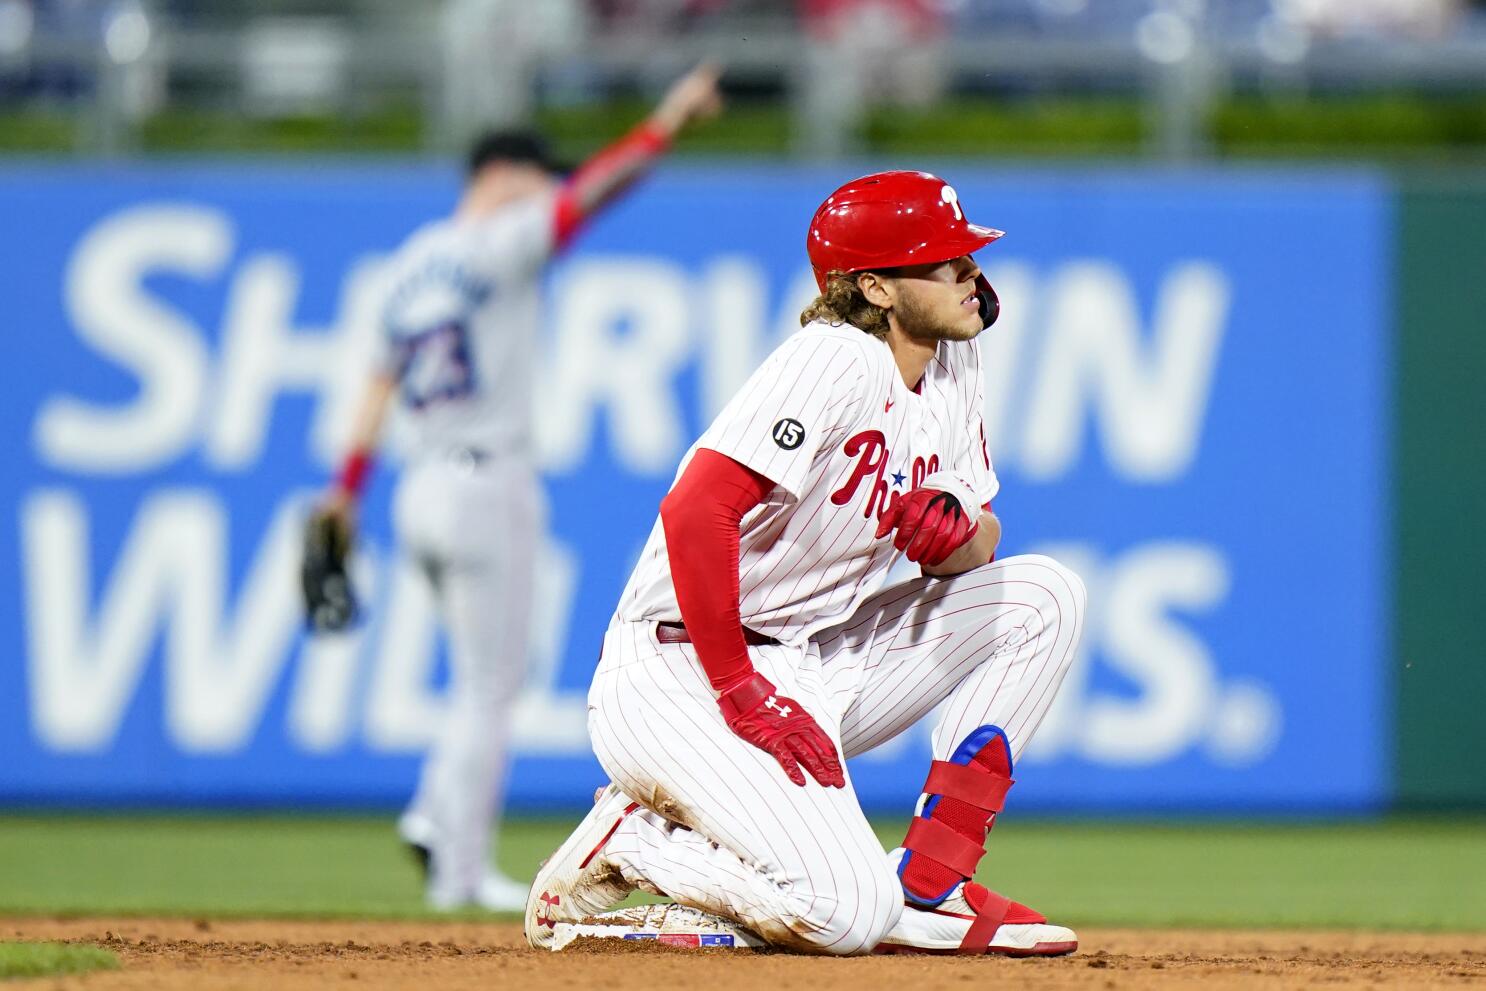 Phillies rally with 7 runs in 8th inning to beat Marlins 8-3